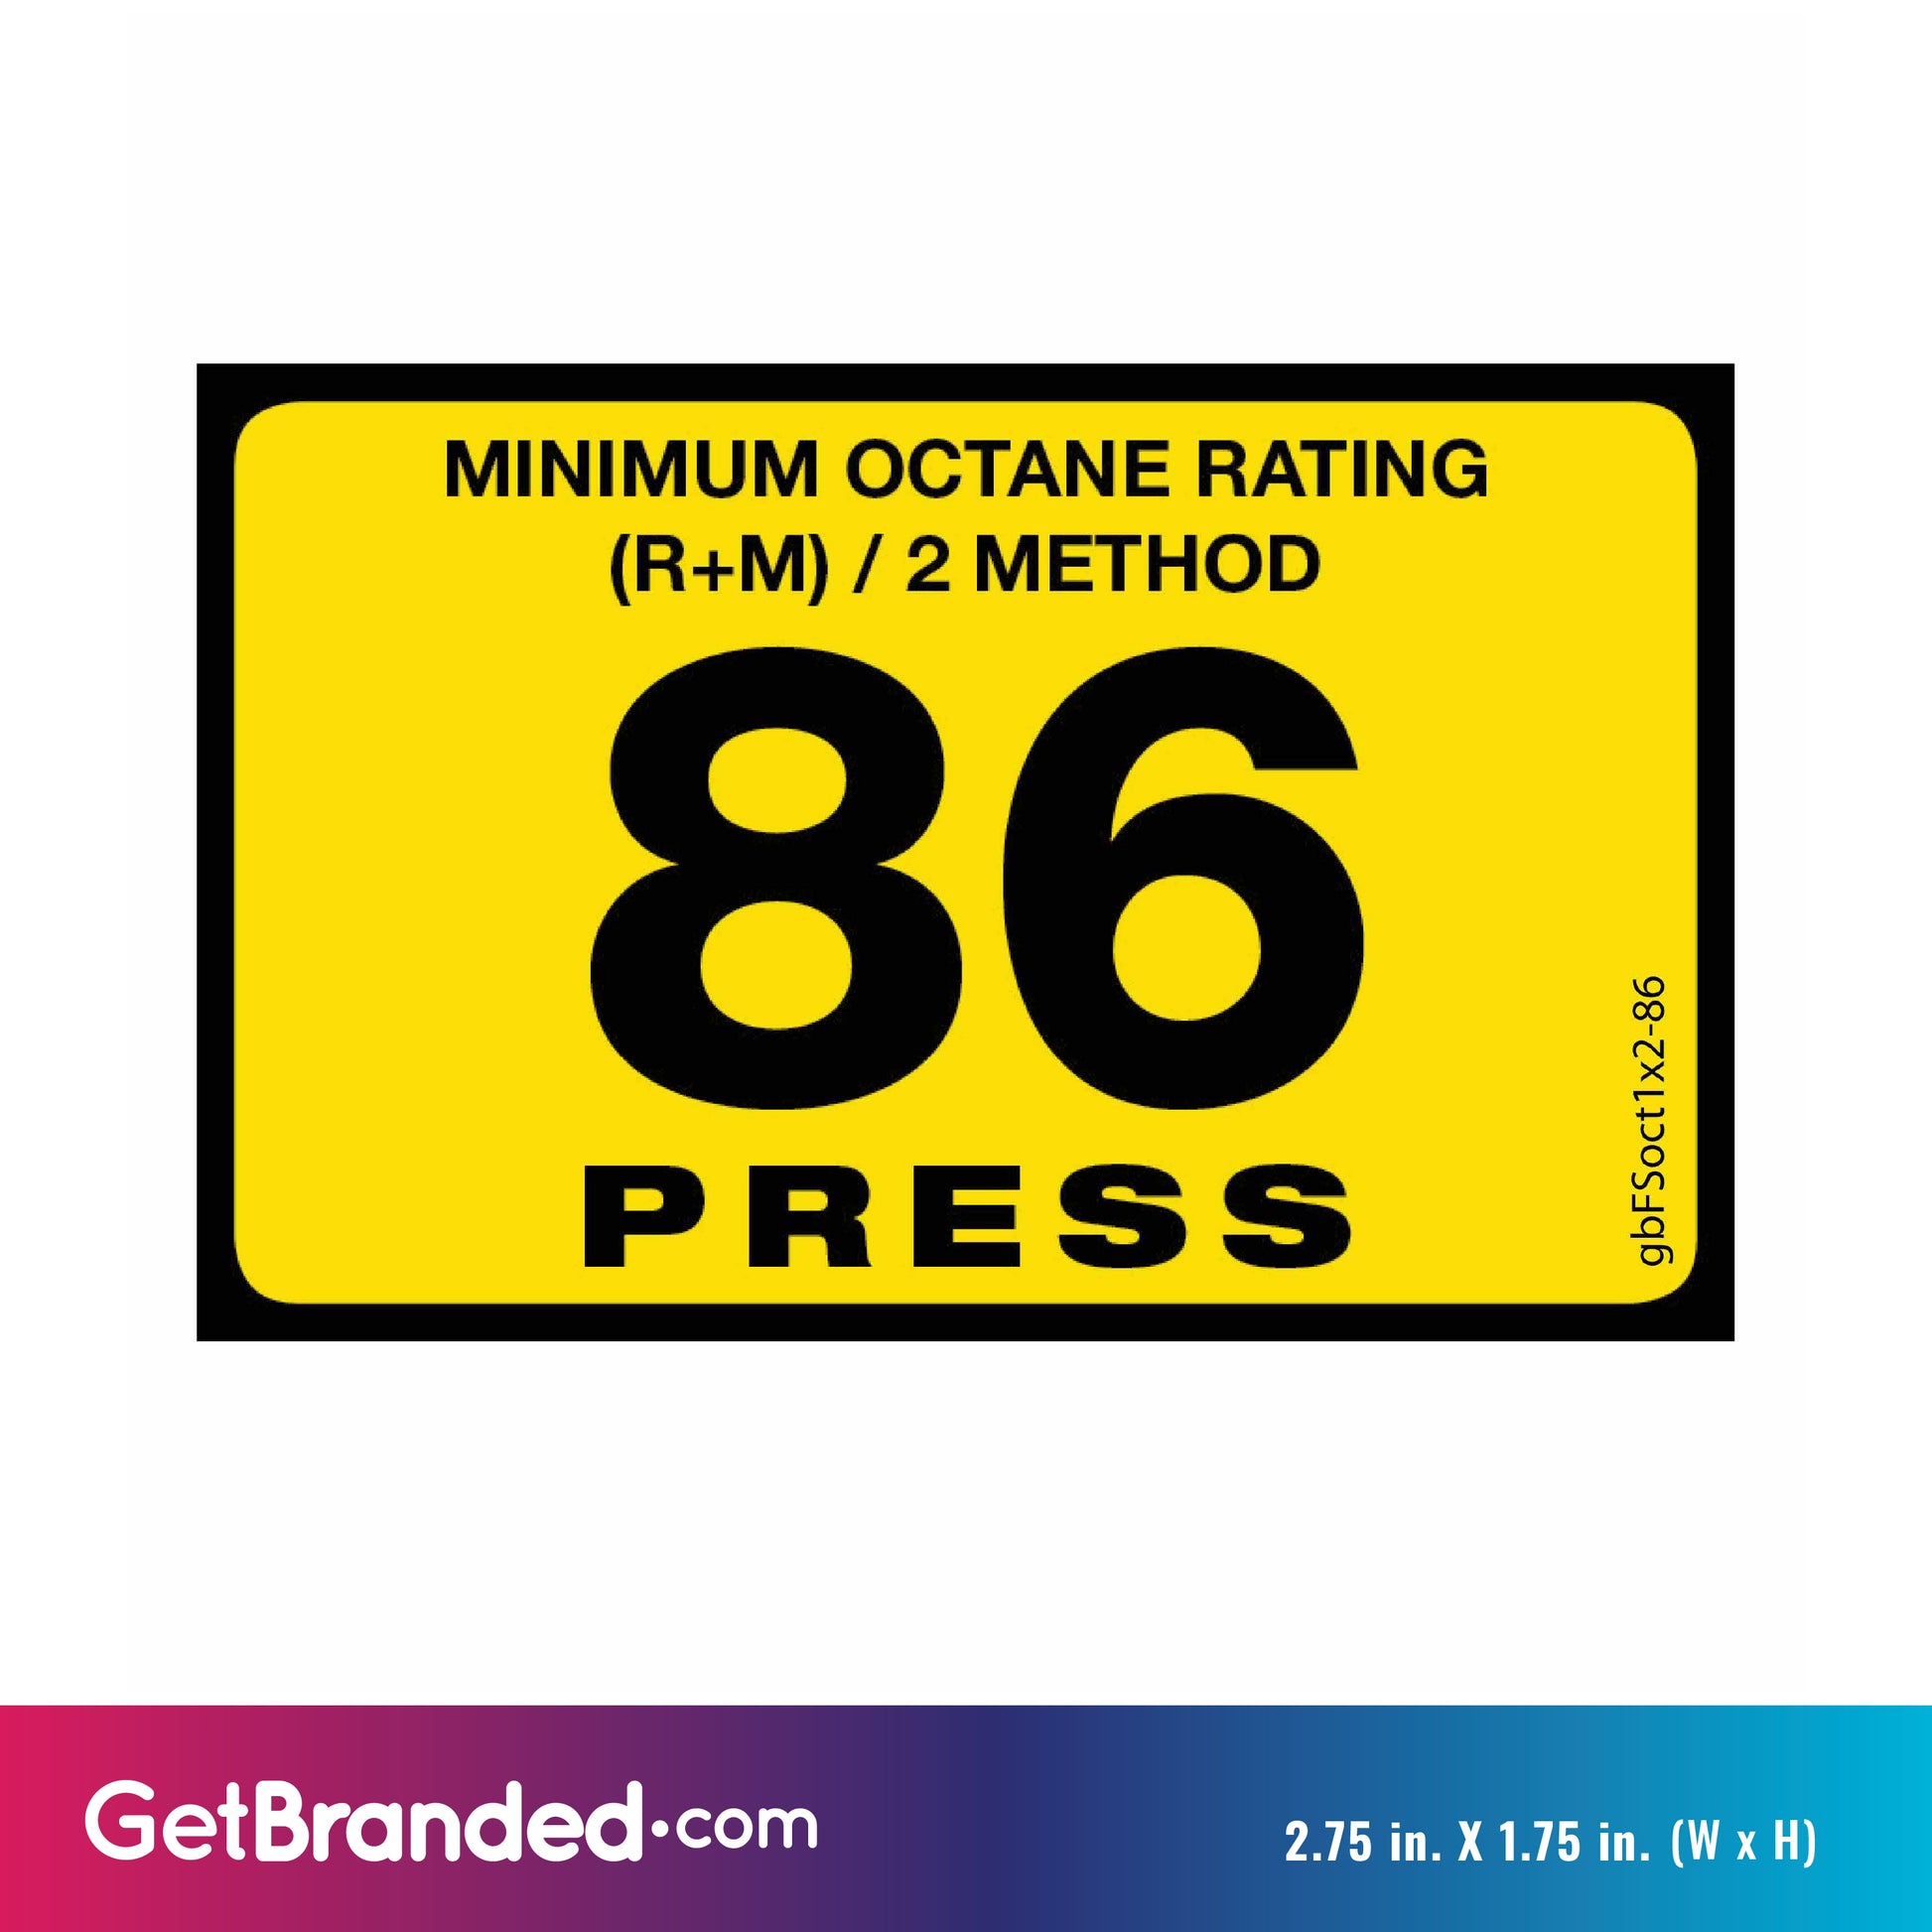 86 Press Octane Rating Decal. 1 inch by 2 inches size guide.